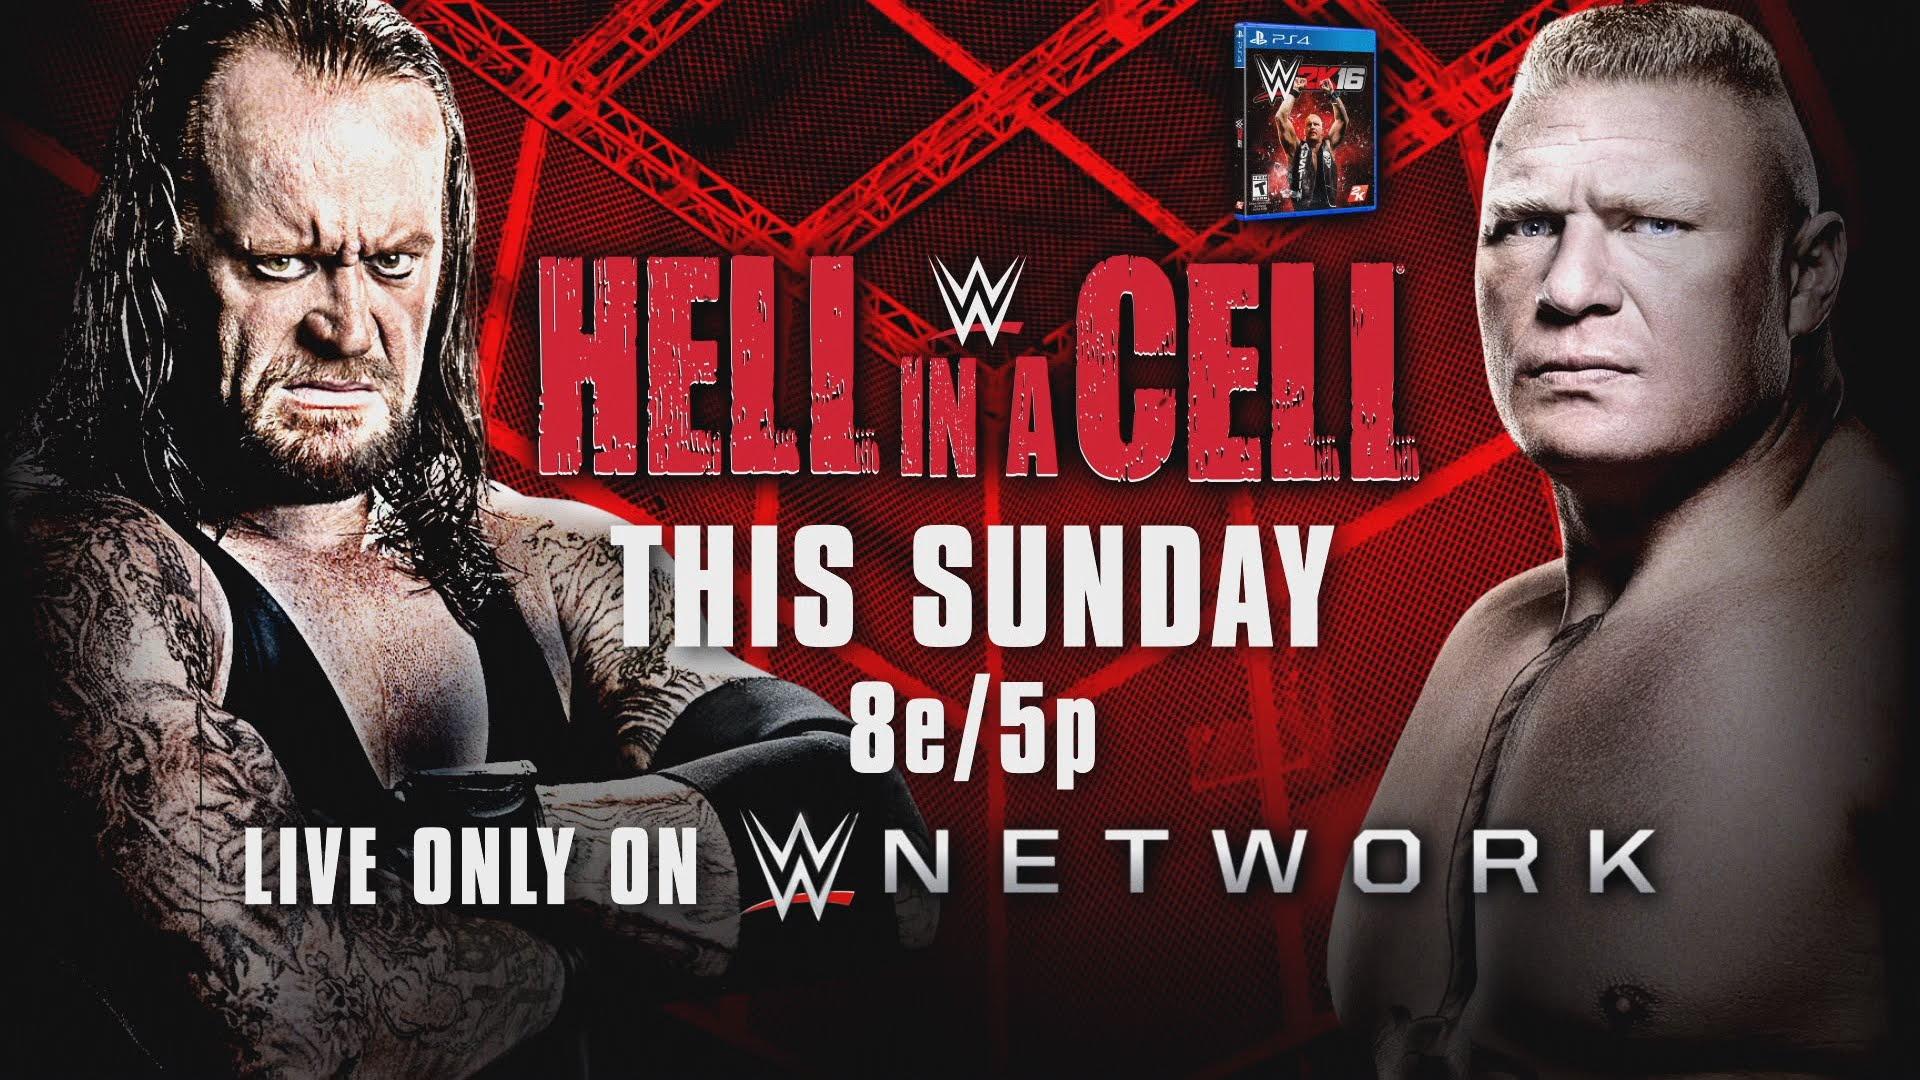 WWE Hell in a Cell 2015: Undertaker vs. Lesnar